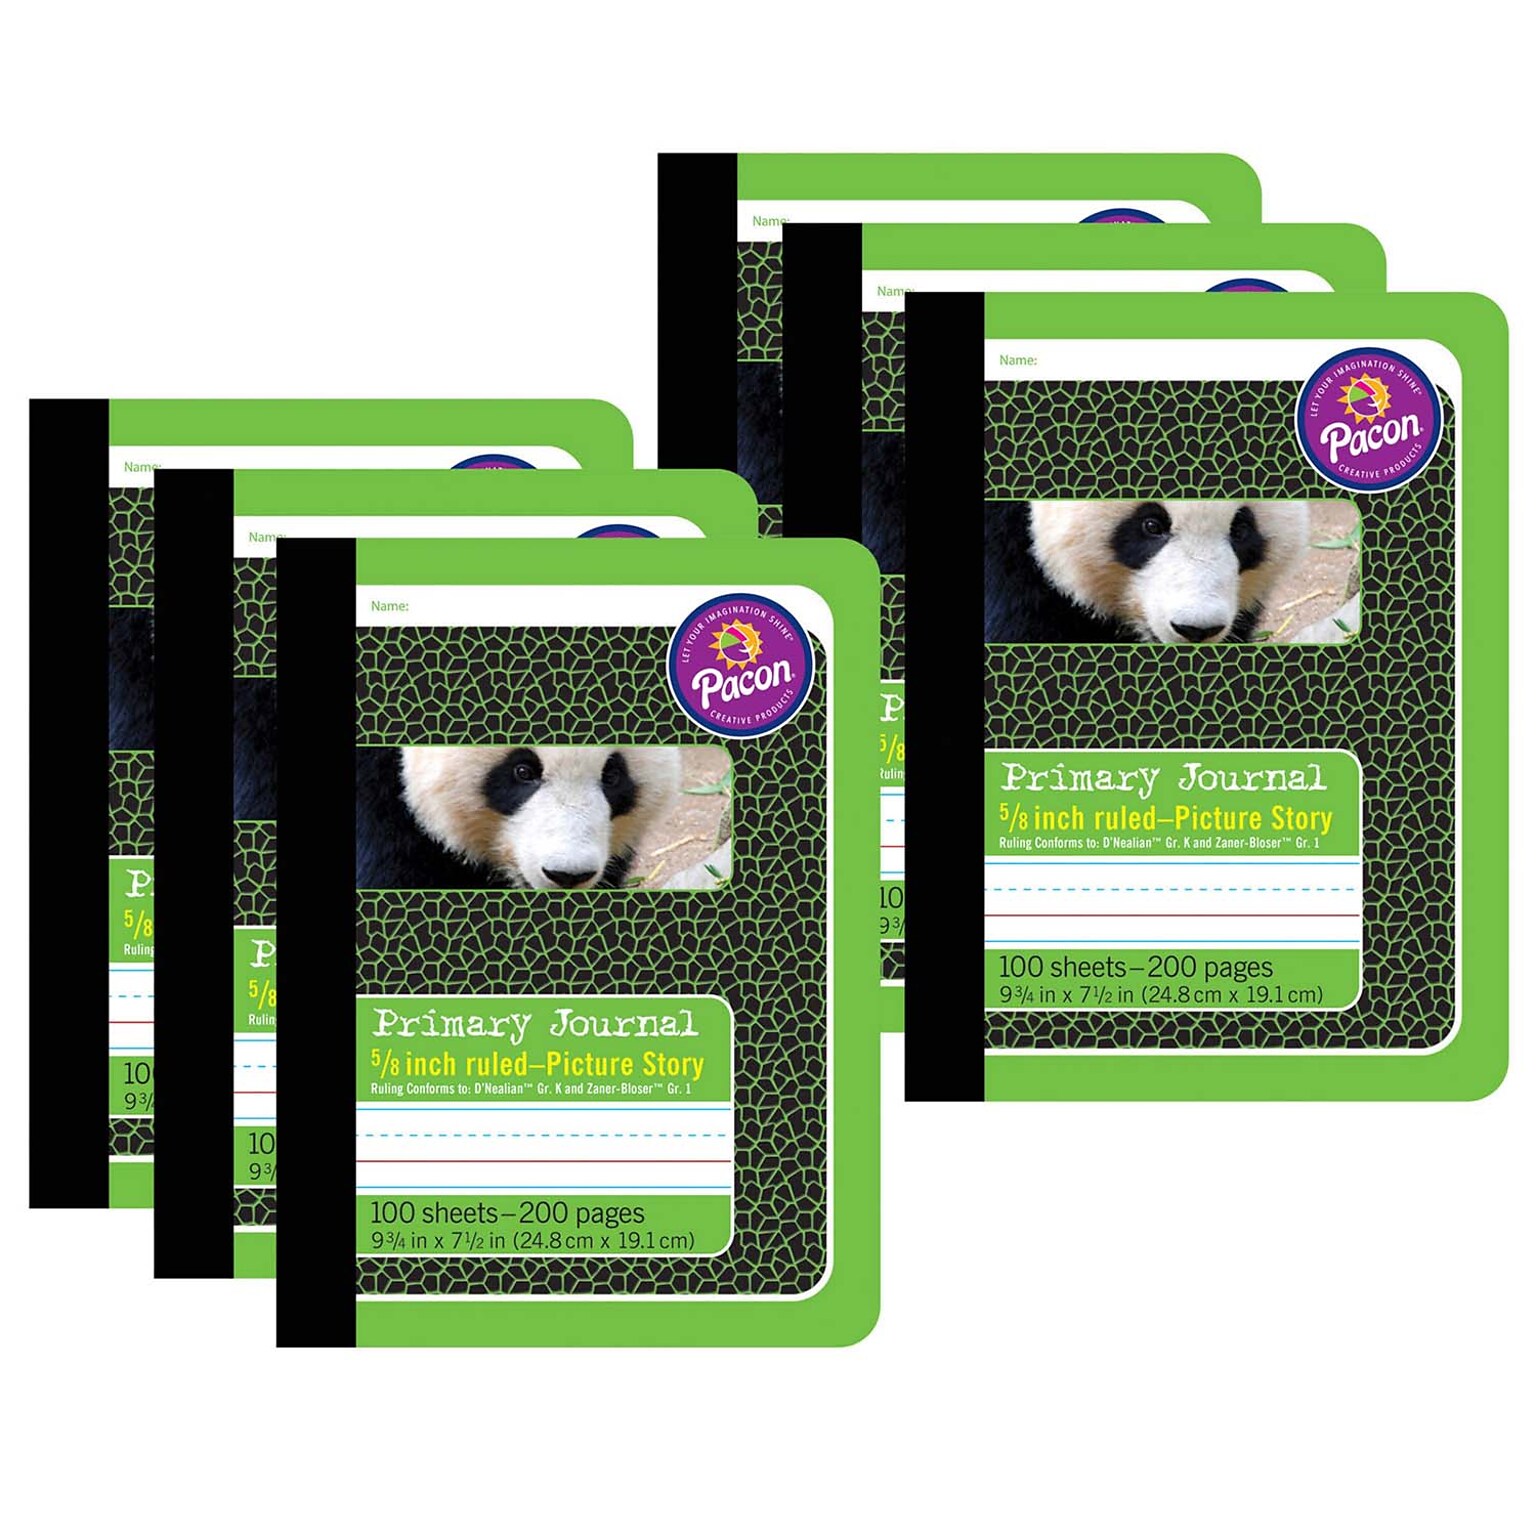 Pacon® Primary Journal, 9.75 x 7.5, .625 Ruled Picture Story, 100 Sheets, Green Panda Cover, Pack of 6 (PAC2428-6)